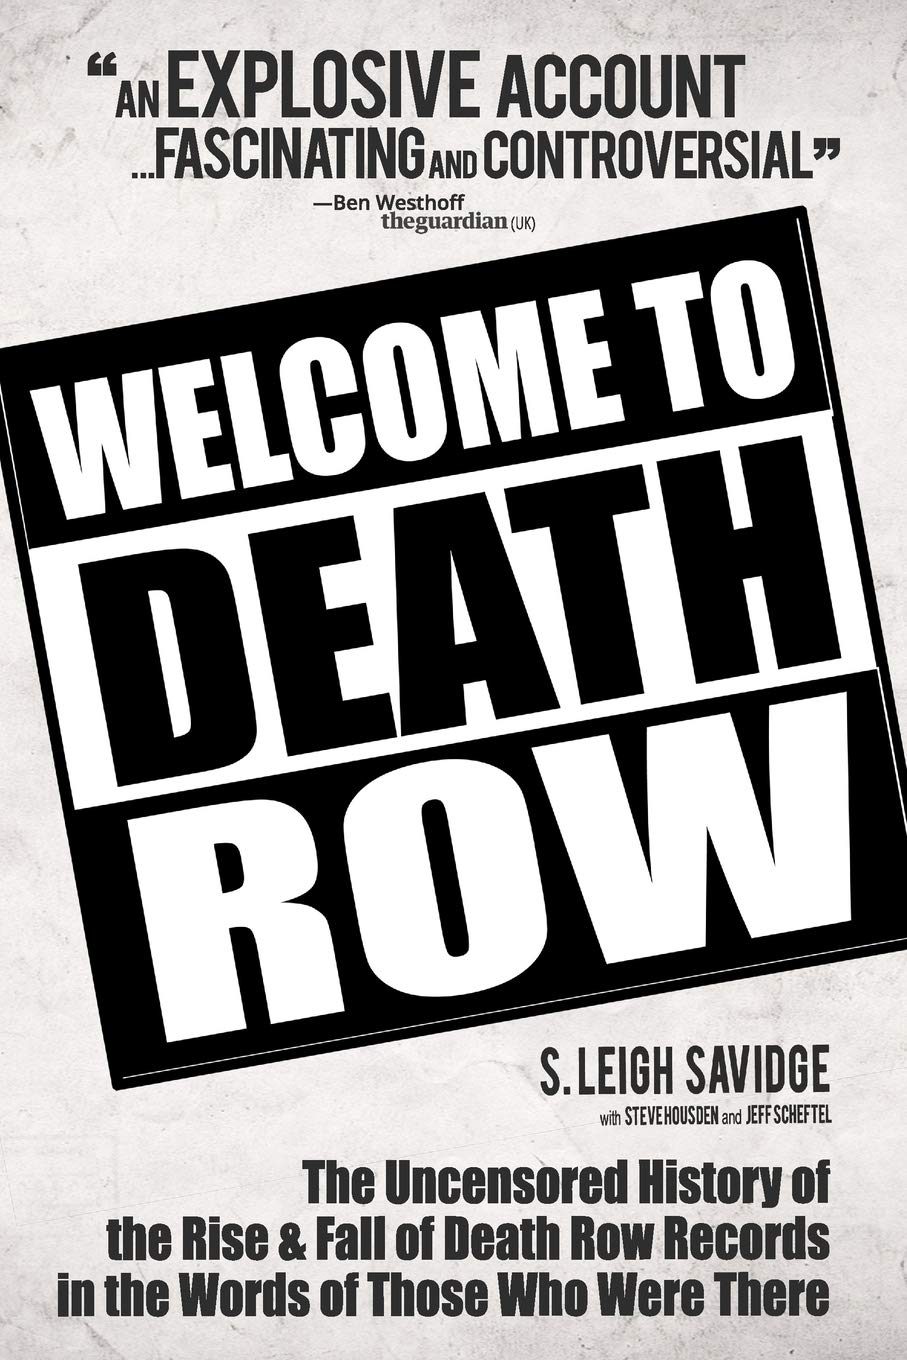 Welcome to Death Row: The Uncensored History of the Rise & Fall of Death Row Records in the Words of Those Who Were There